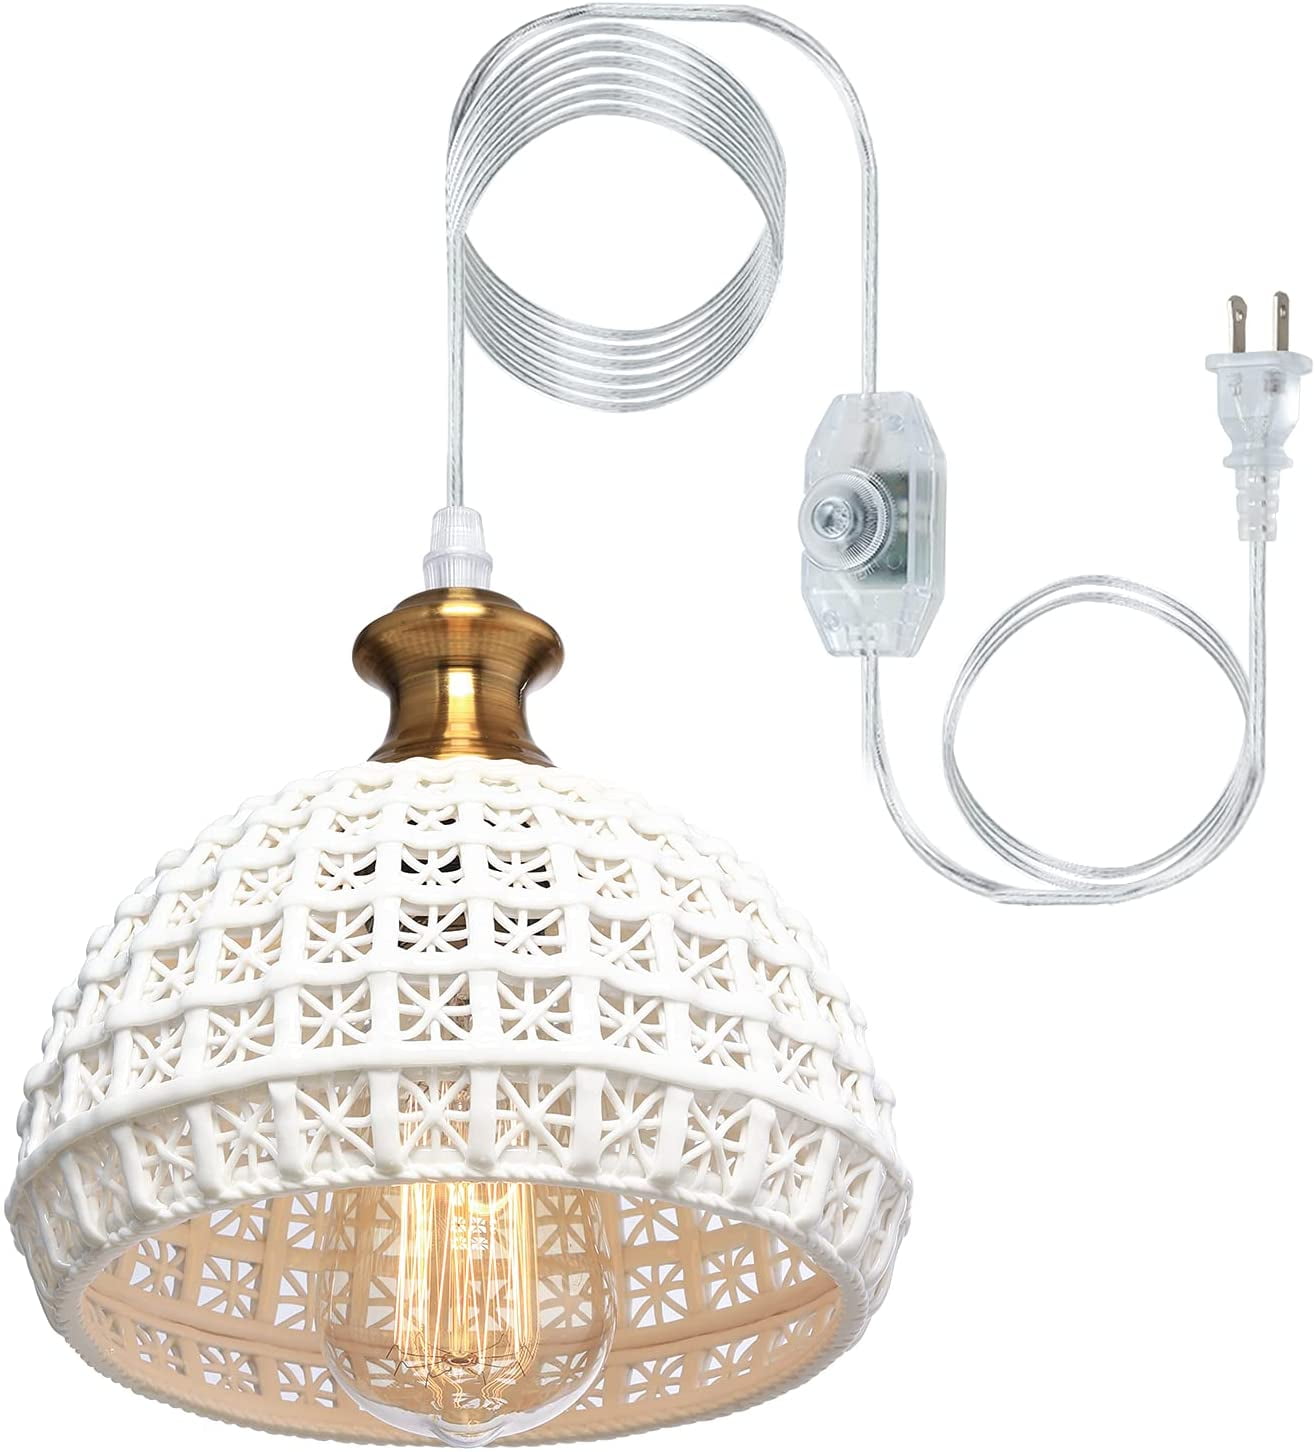 Vintage Metal Spherical Lantern Chandelier Ceiling Light Fixture HMVPL Plug-in Industrial Globe Pendant Lights with 16.4 Ft Hanging Cord and Dimmable On/Off Switch